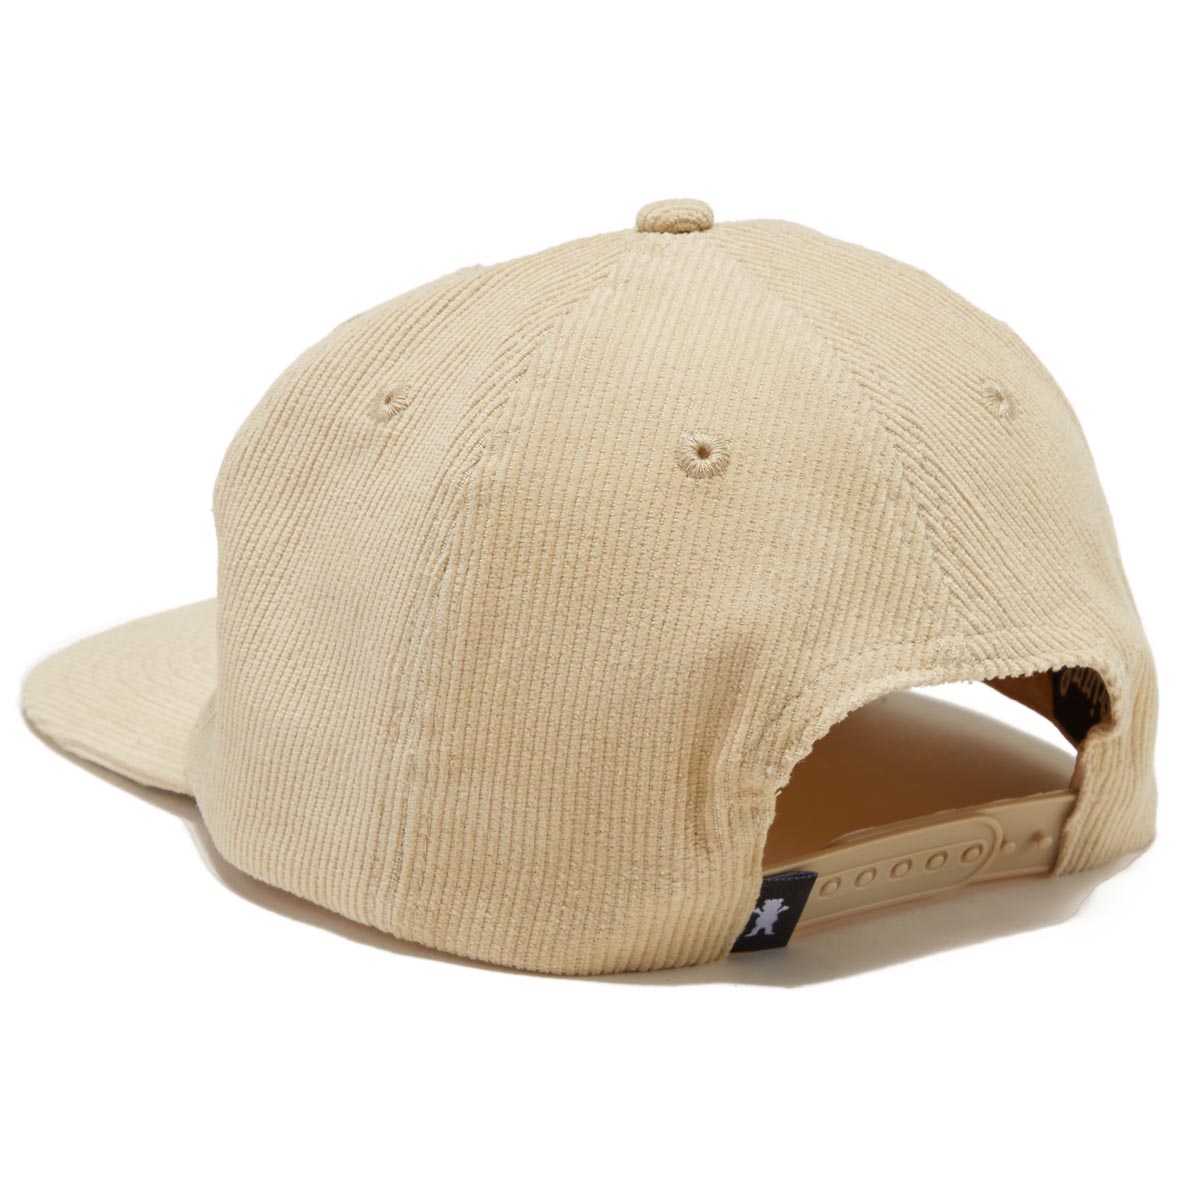 Grizzly Most High Unstructured Snapback Hat - Khaki image 2